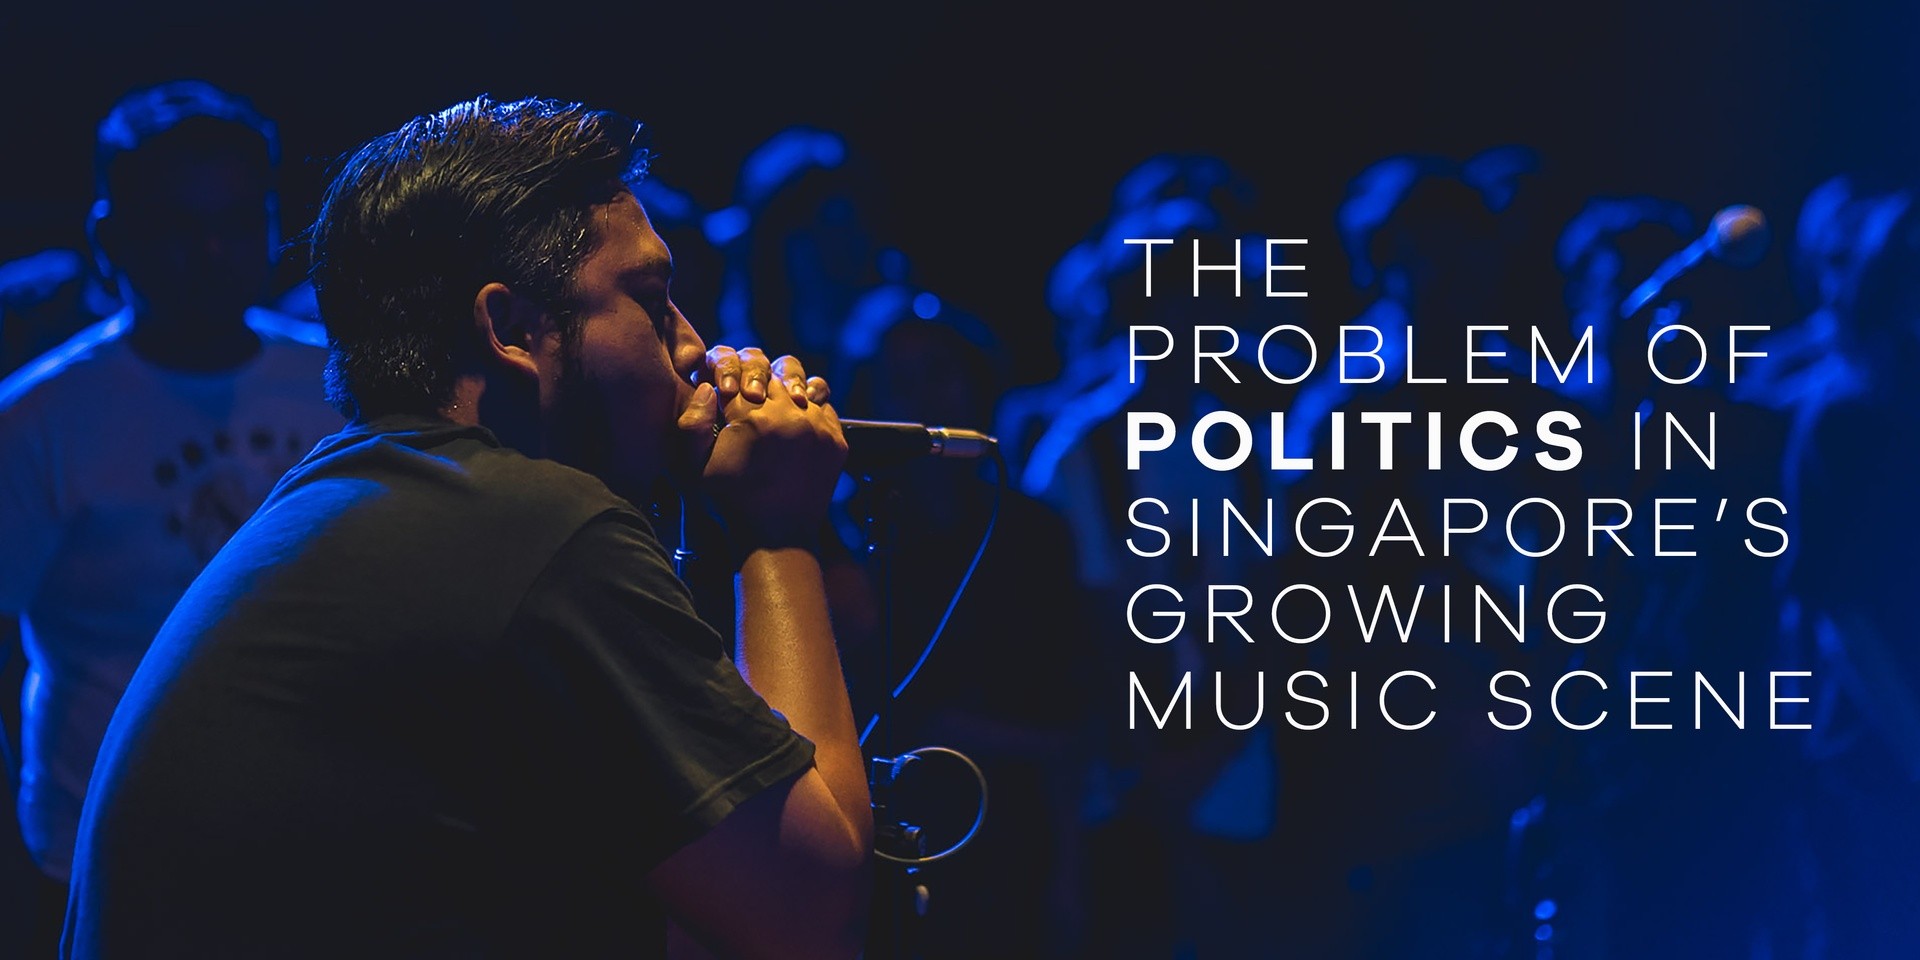 The problem of politics in Singapore’s growing music scene